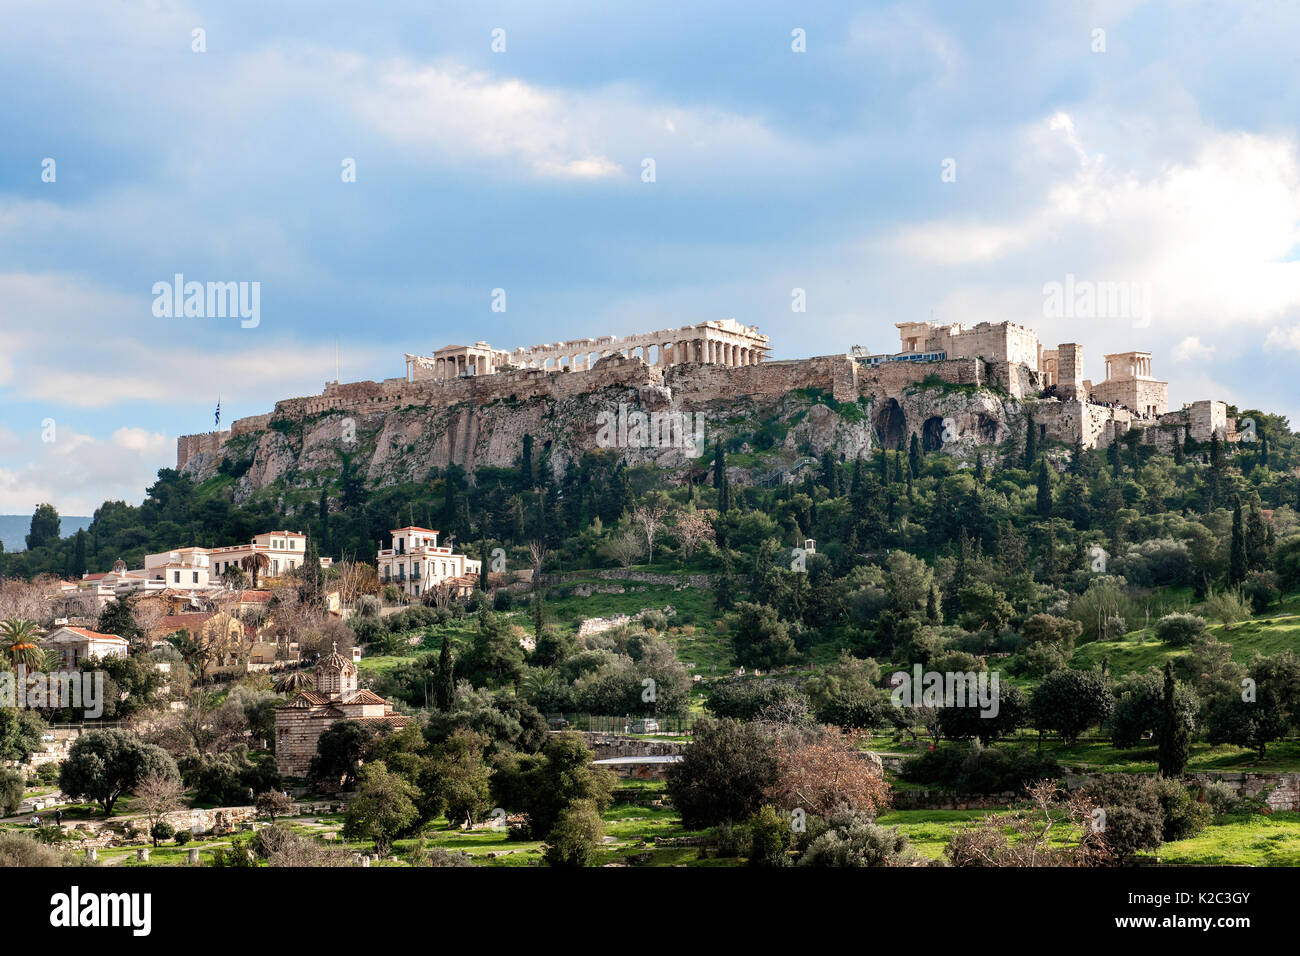 Acropolis Hill and Acropolis of Athens as seen from  Thiseio. In the left hand corner is Plaka, an old historical neighbourhood of Athens, Attica region, Athens, Greece, Mediterranean, January 2011. Stock Photo